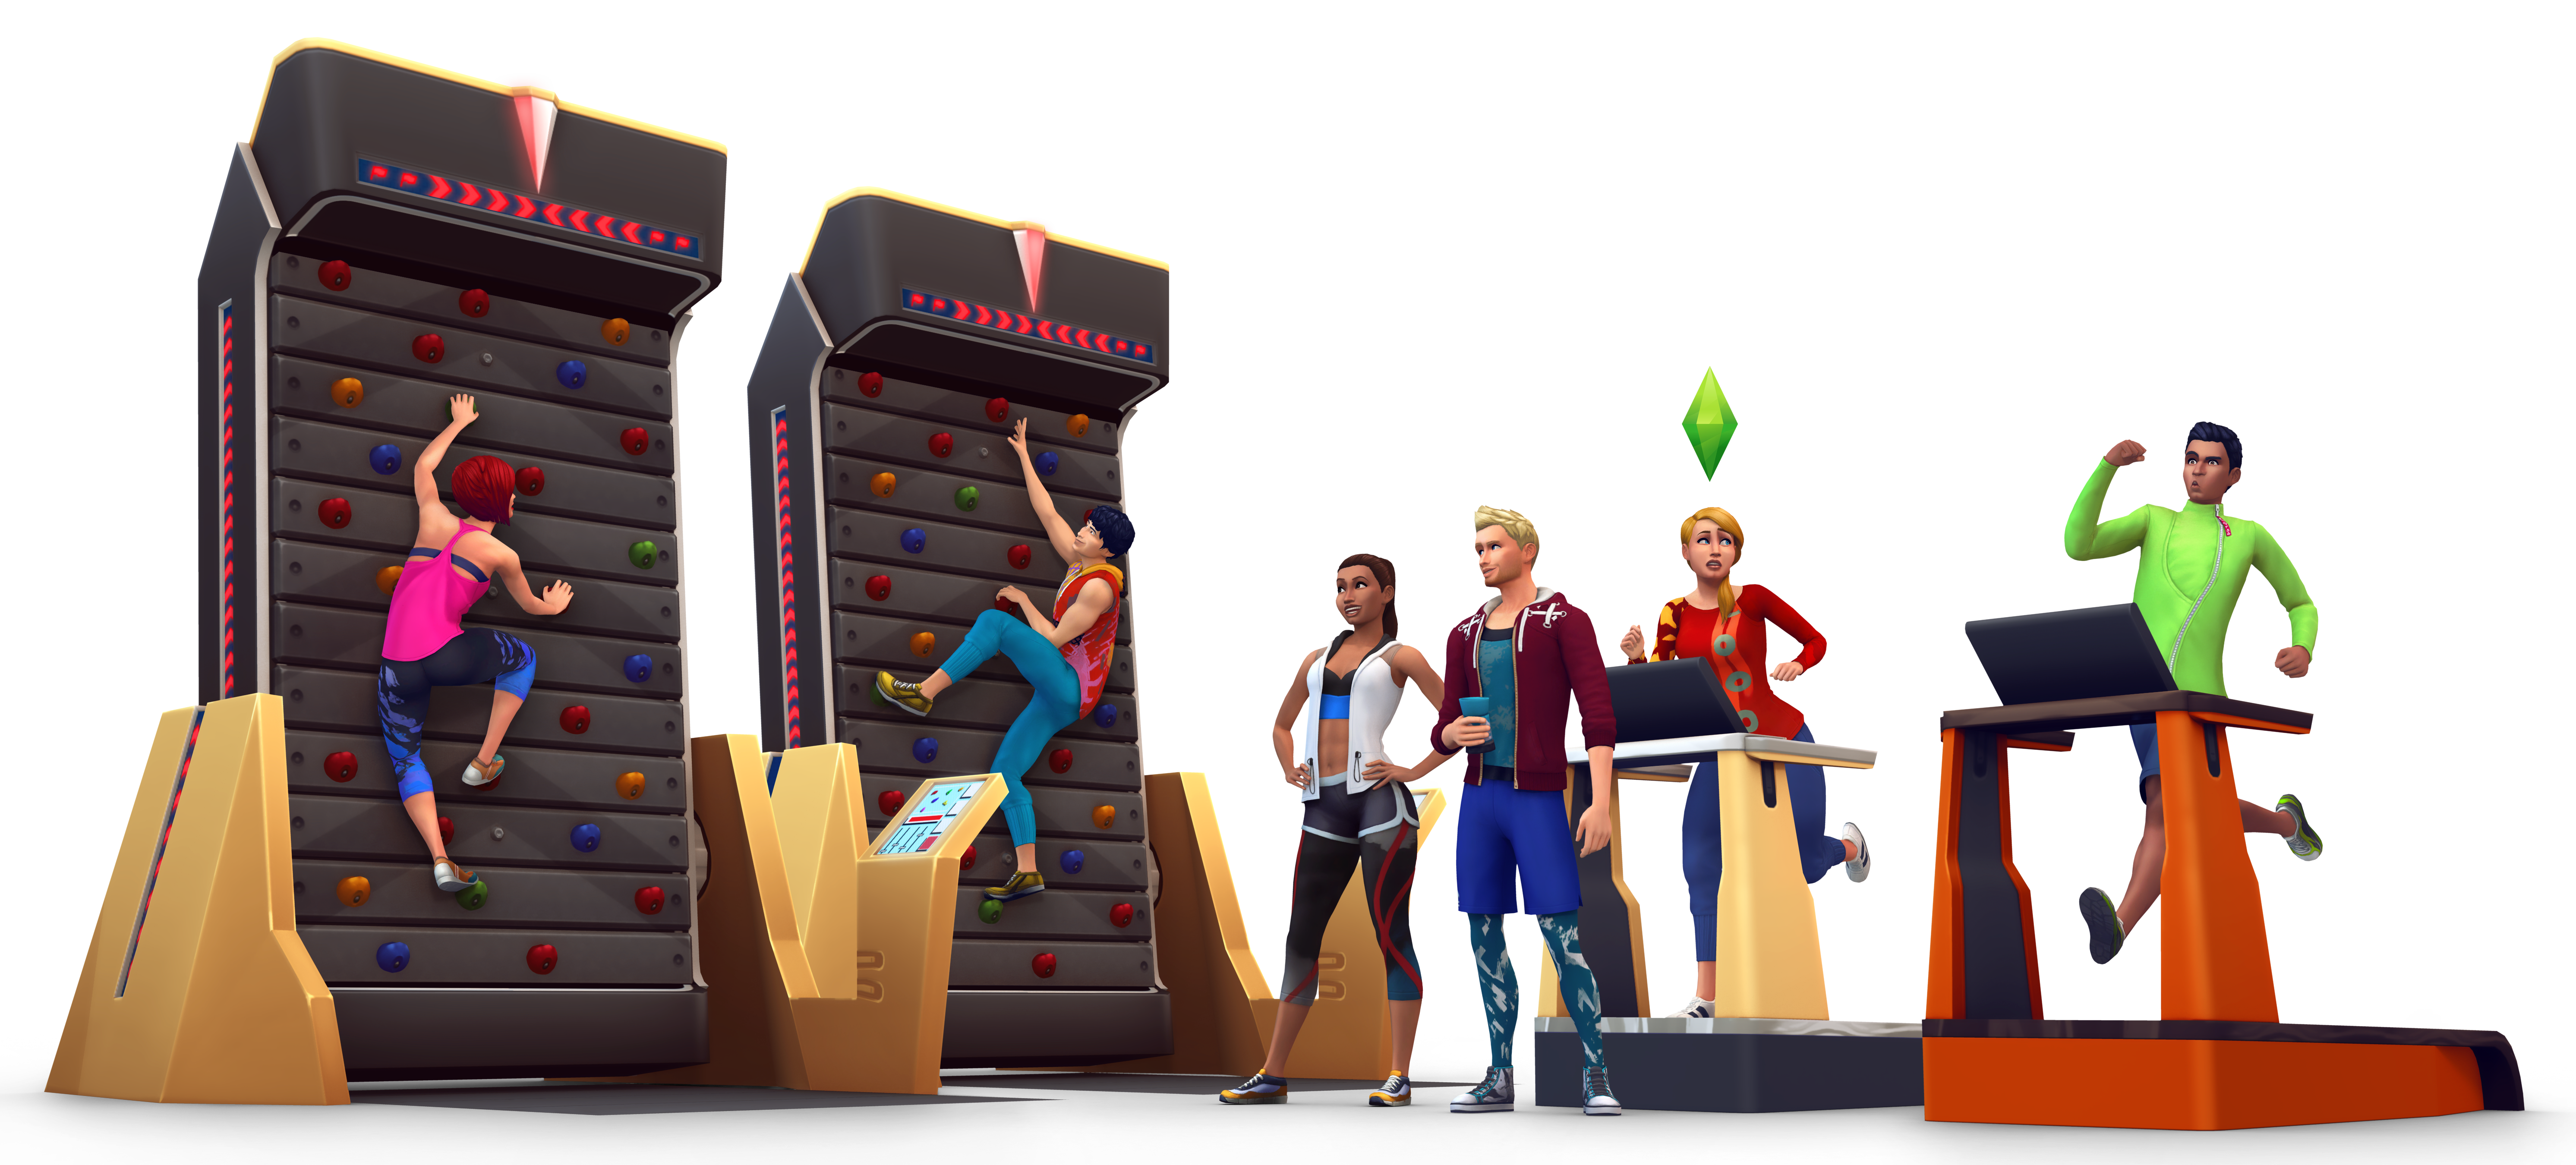 The Sims 4 Fitness Stuff: Official Logo, Box Art ...